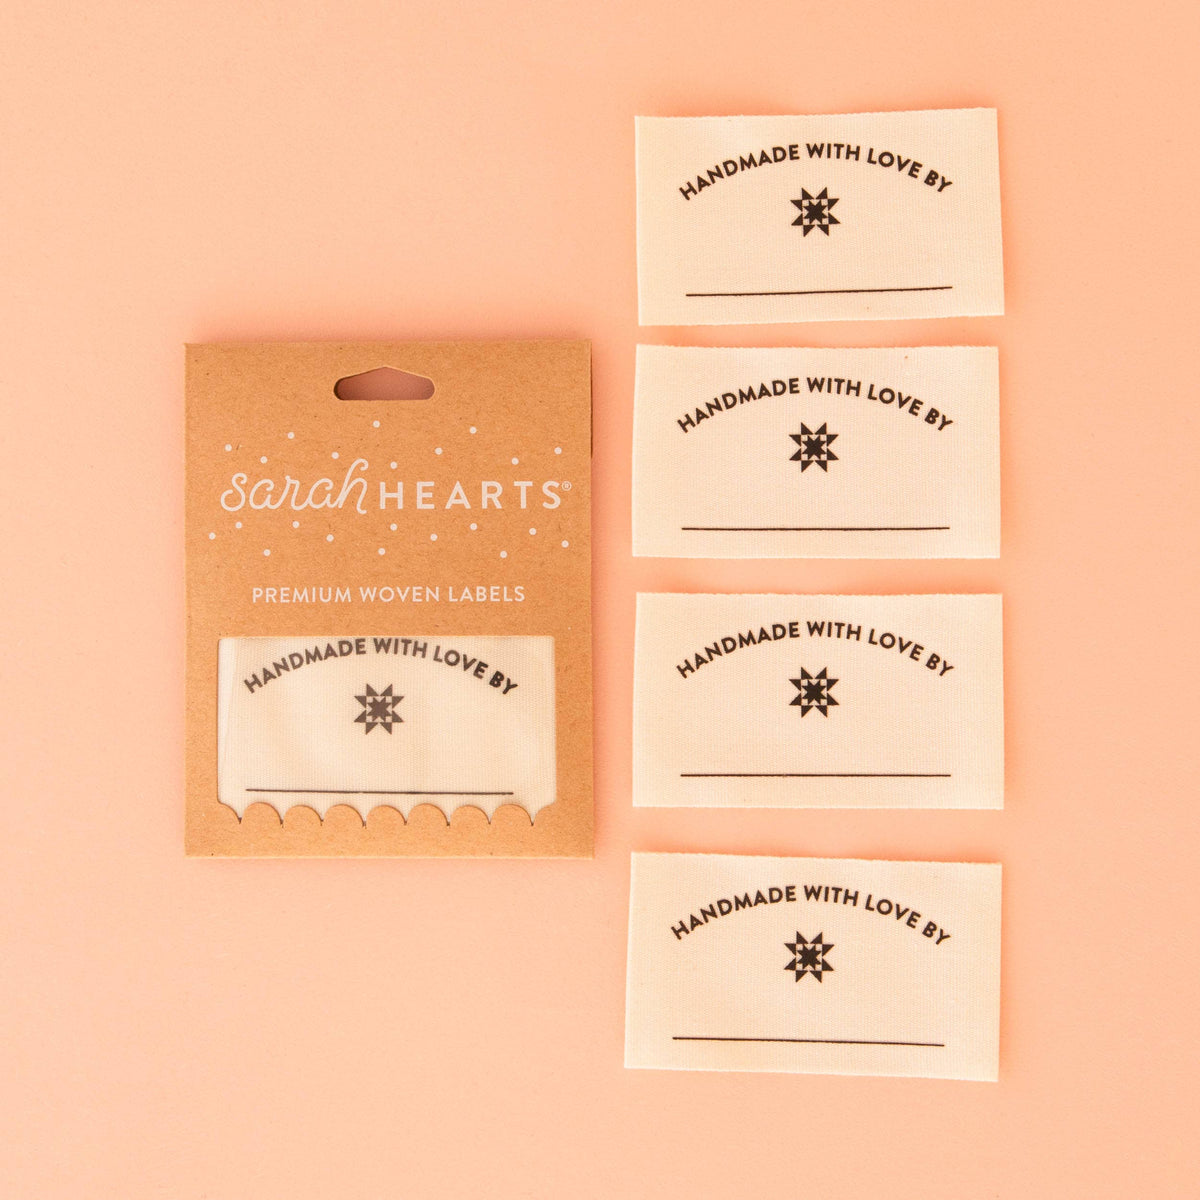 Handmade with Love Organic Cotton Sewing Labels | Sarah Hearts